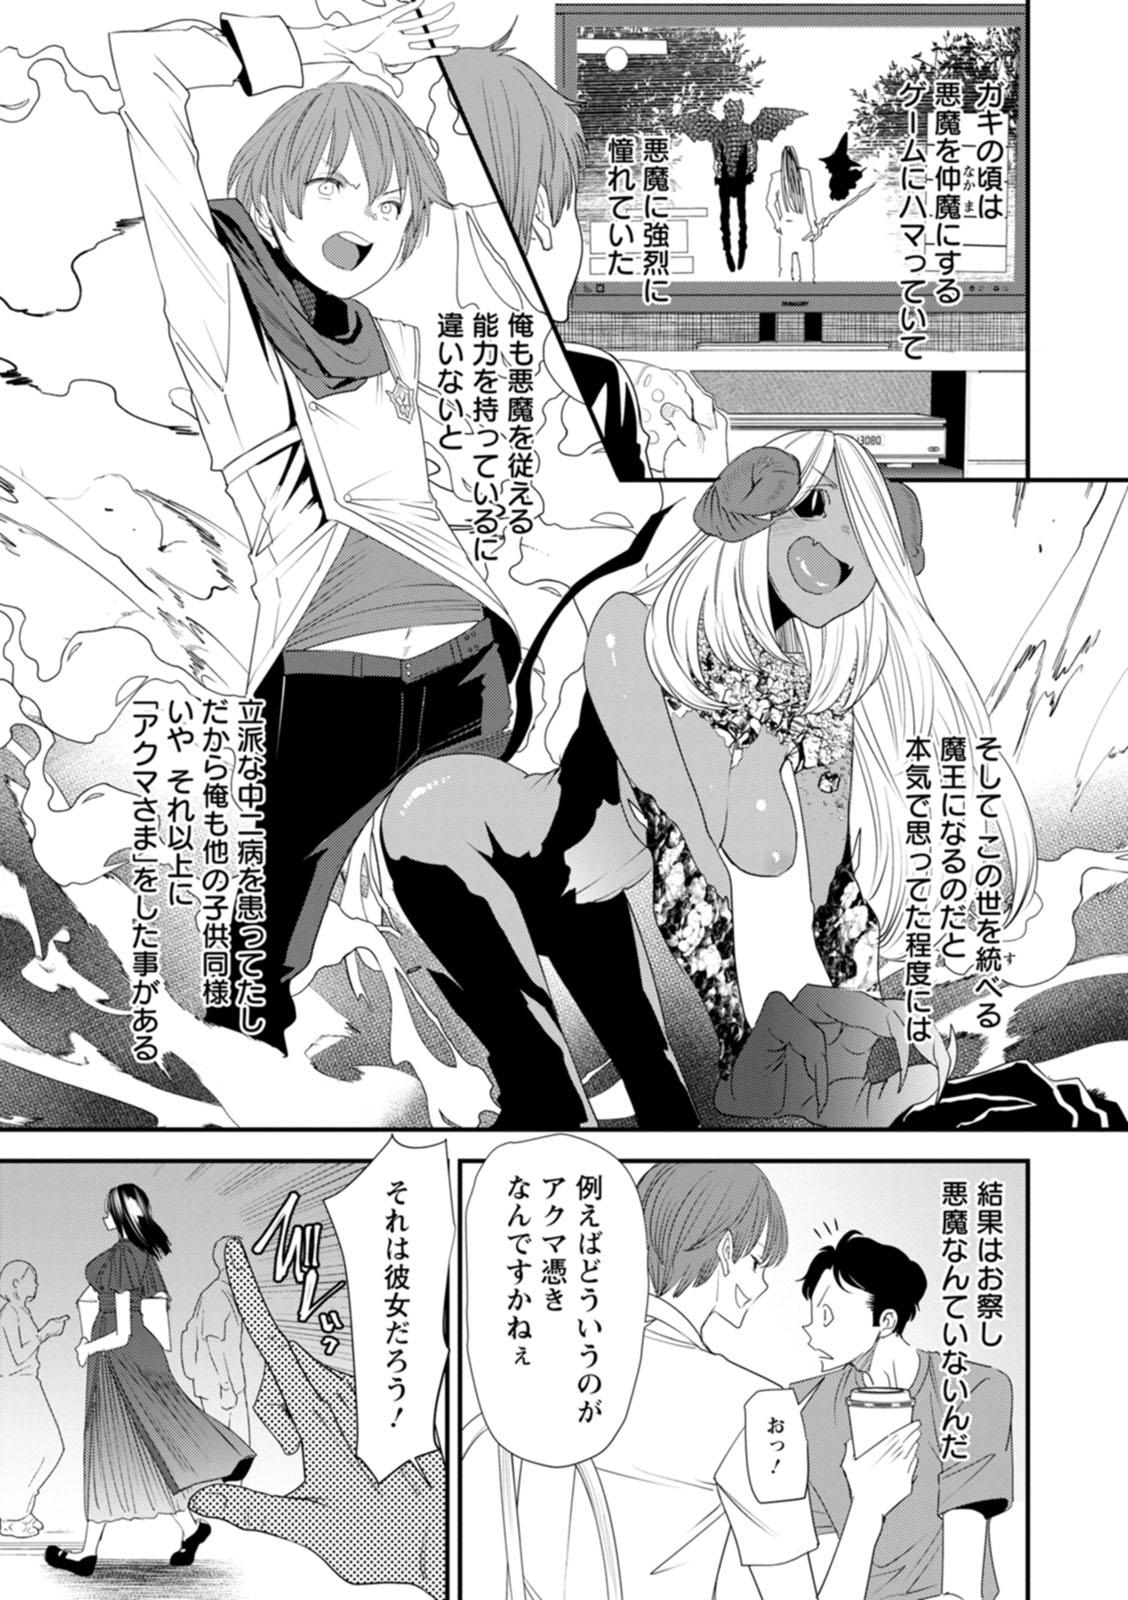 Foot Worship Inma Joshi Daisei no Yuuutsu - The Melancholy of the Succubus who is a college student Sislovesme - Page 9